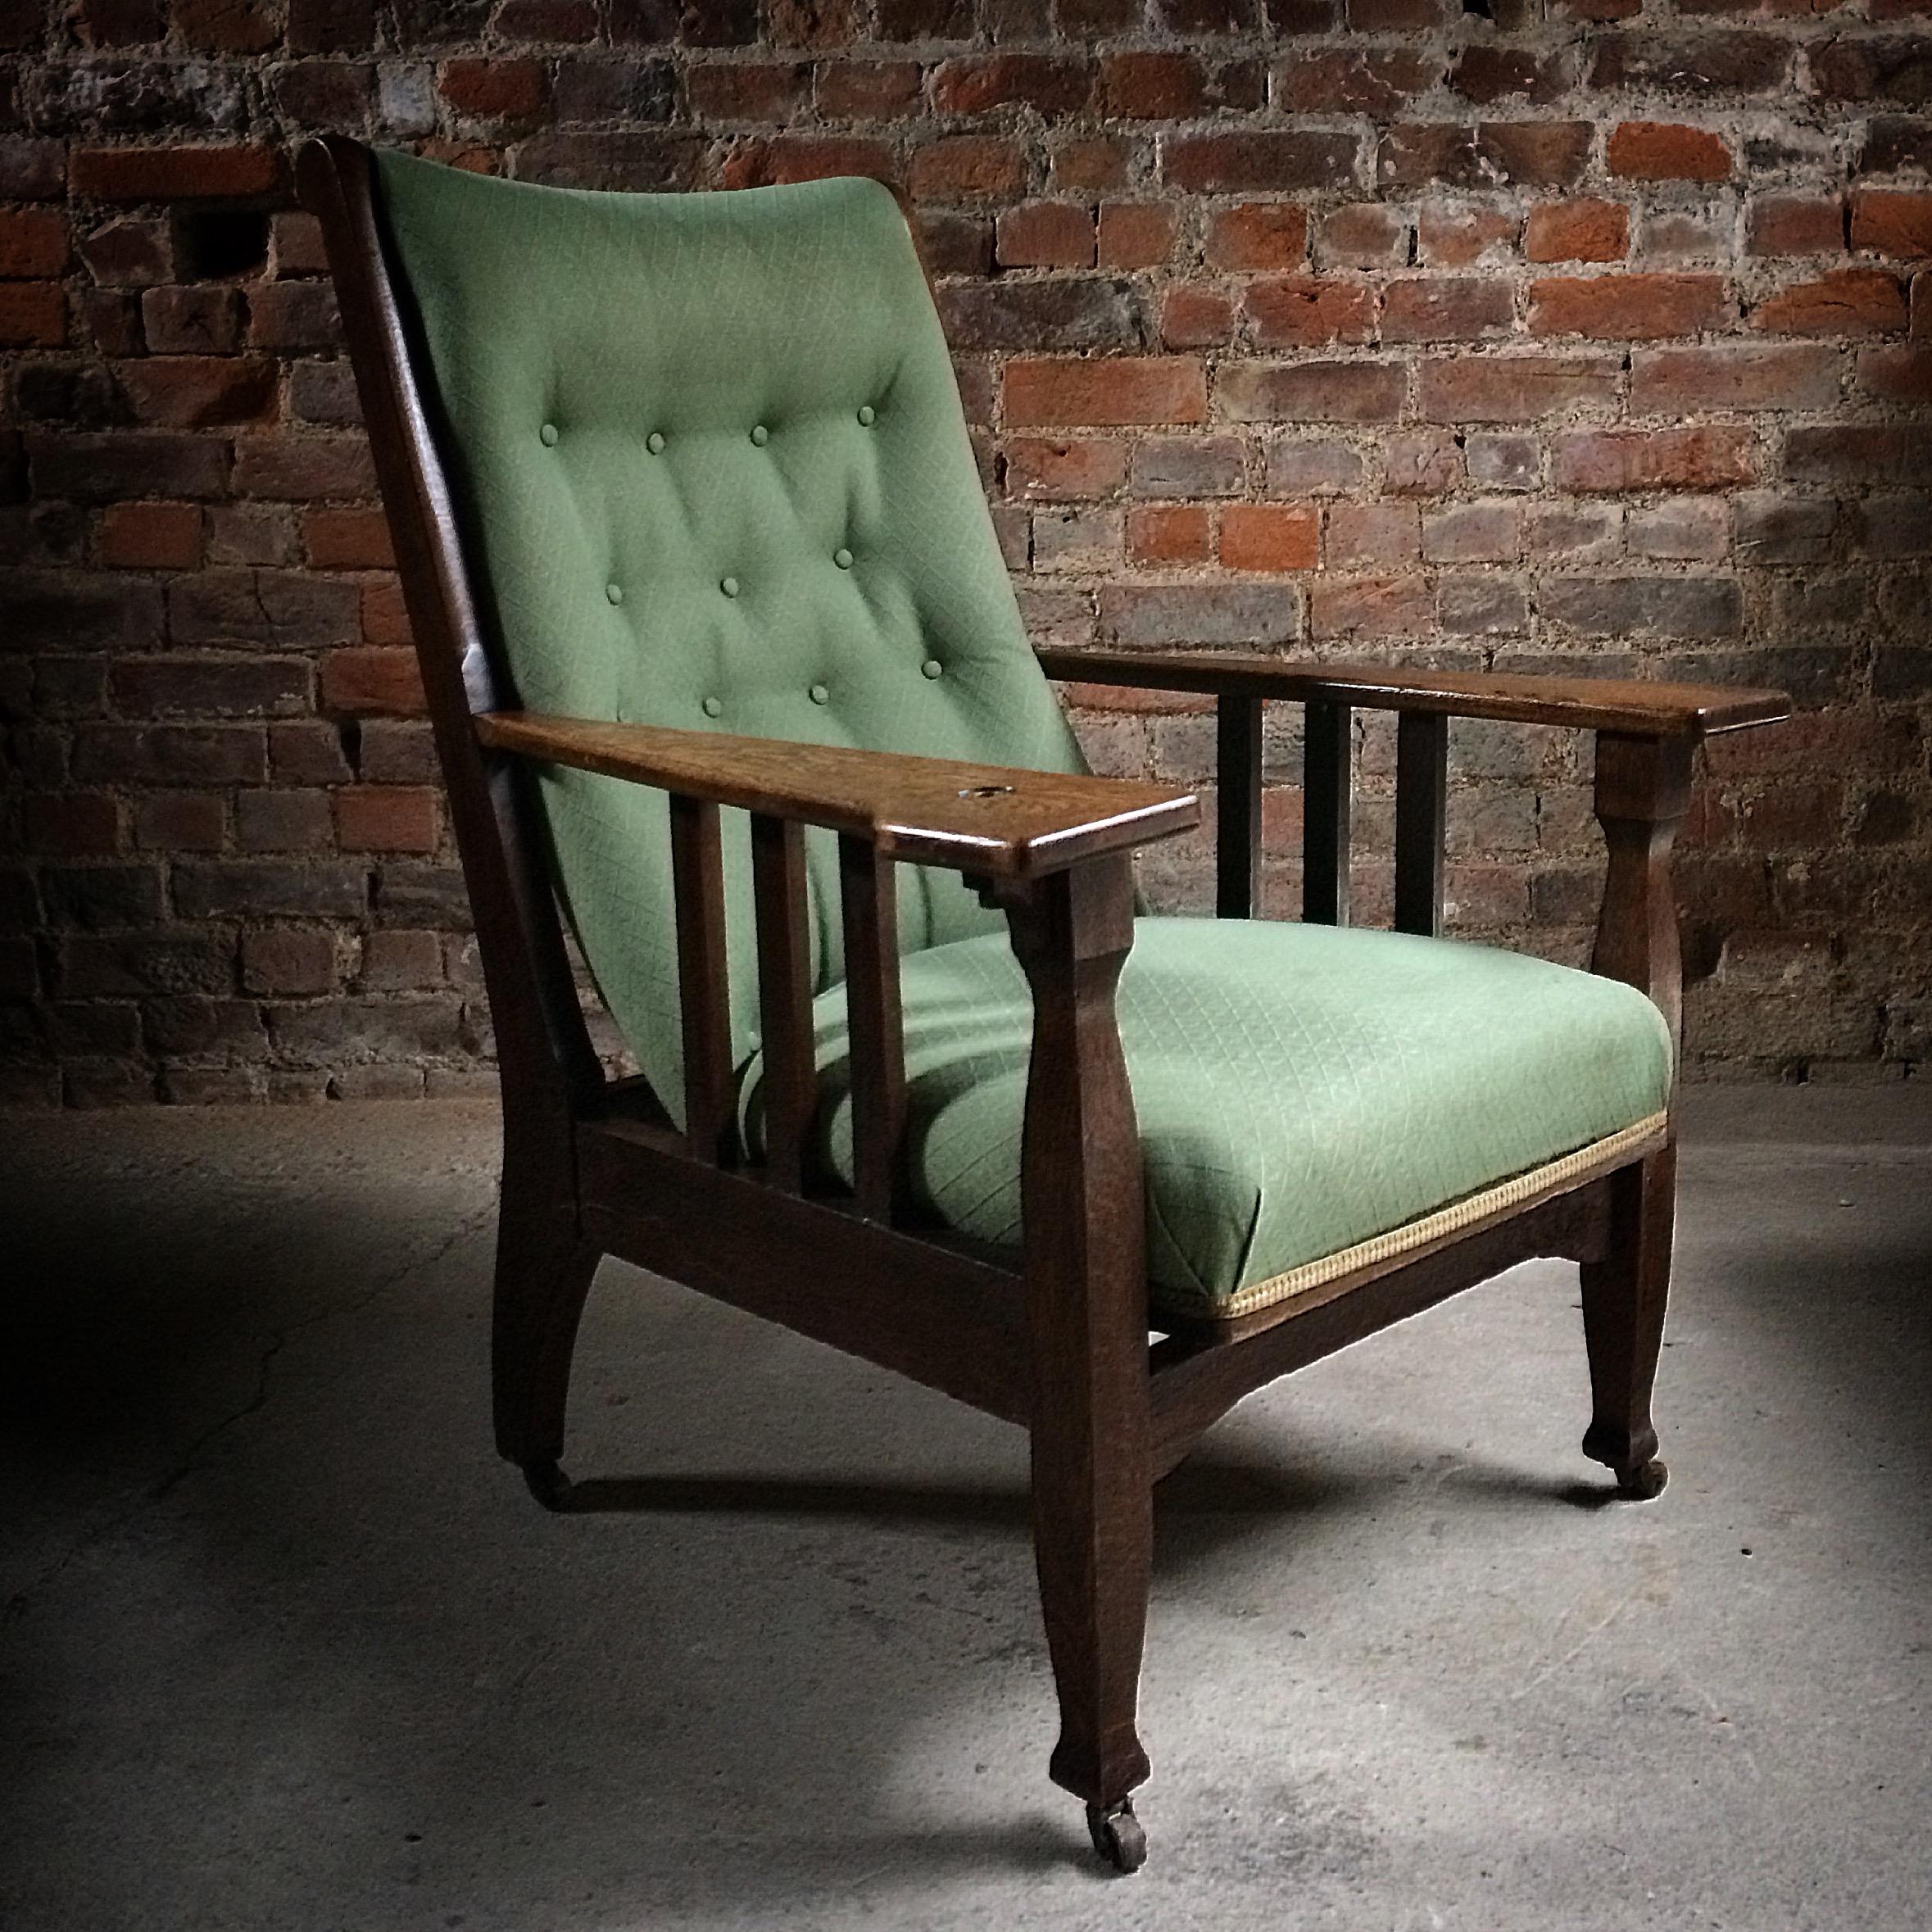 
A fabulous early 20th century Arts & Crafts oak button-back armchair or smokers chair circa 1920s, the green button back material is now tired and although still very useable it would benefit from being re-upholstered, the chair with adjustable